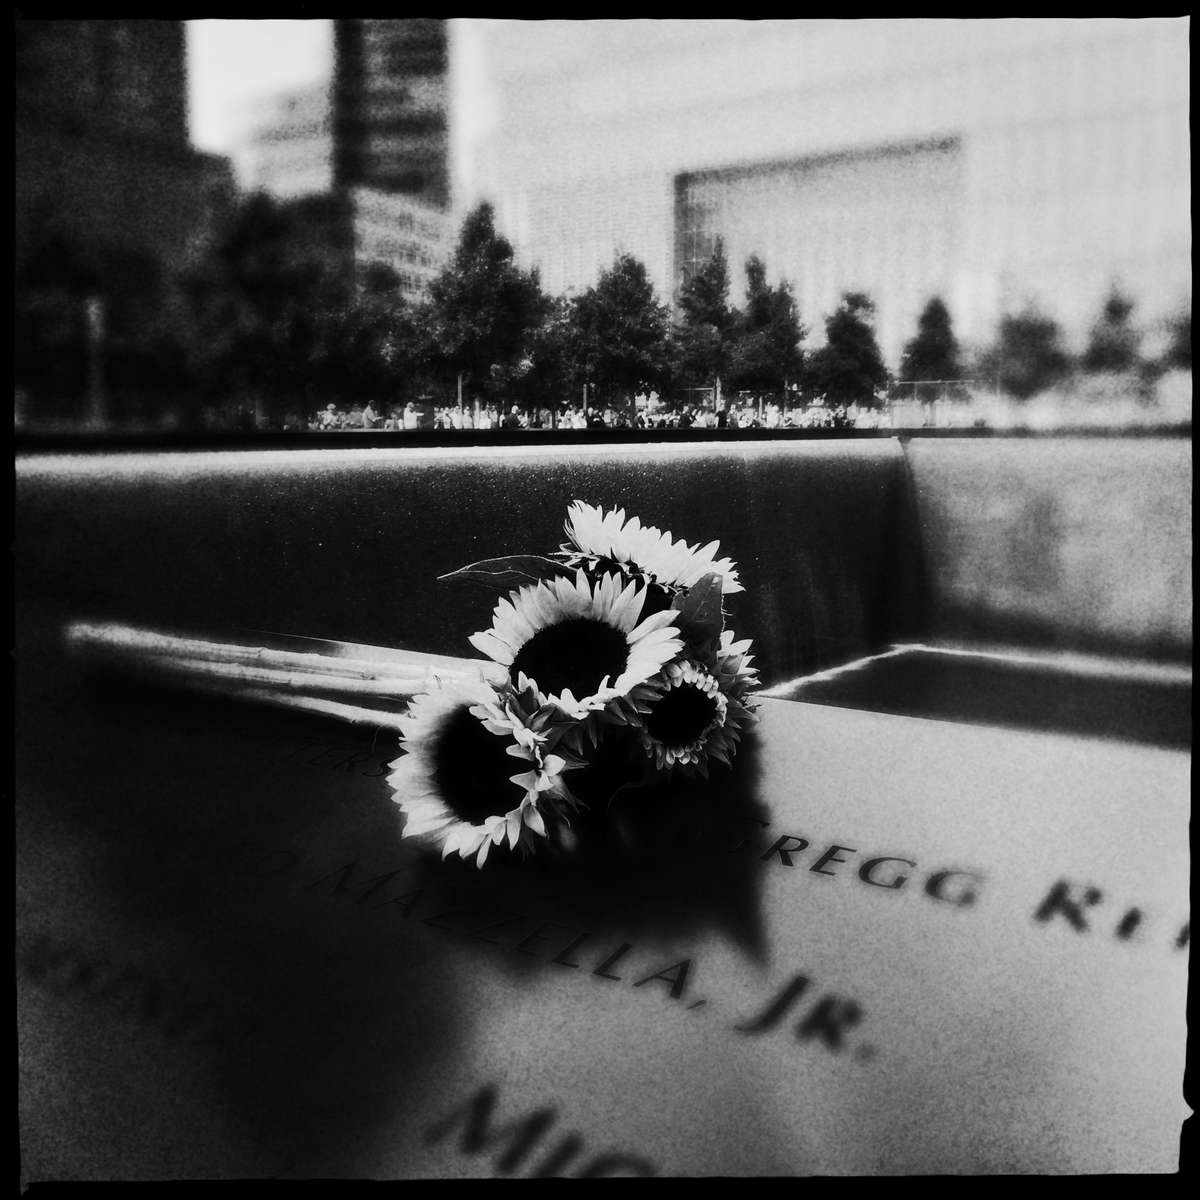 Sunflower at 9/11 Memorial Site in New York. The flower language is hope... A day before the anniversary. 